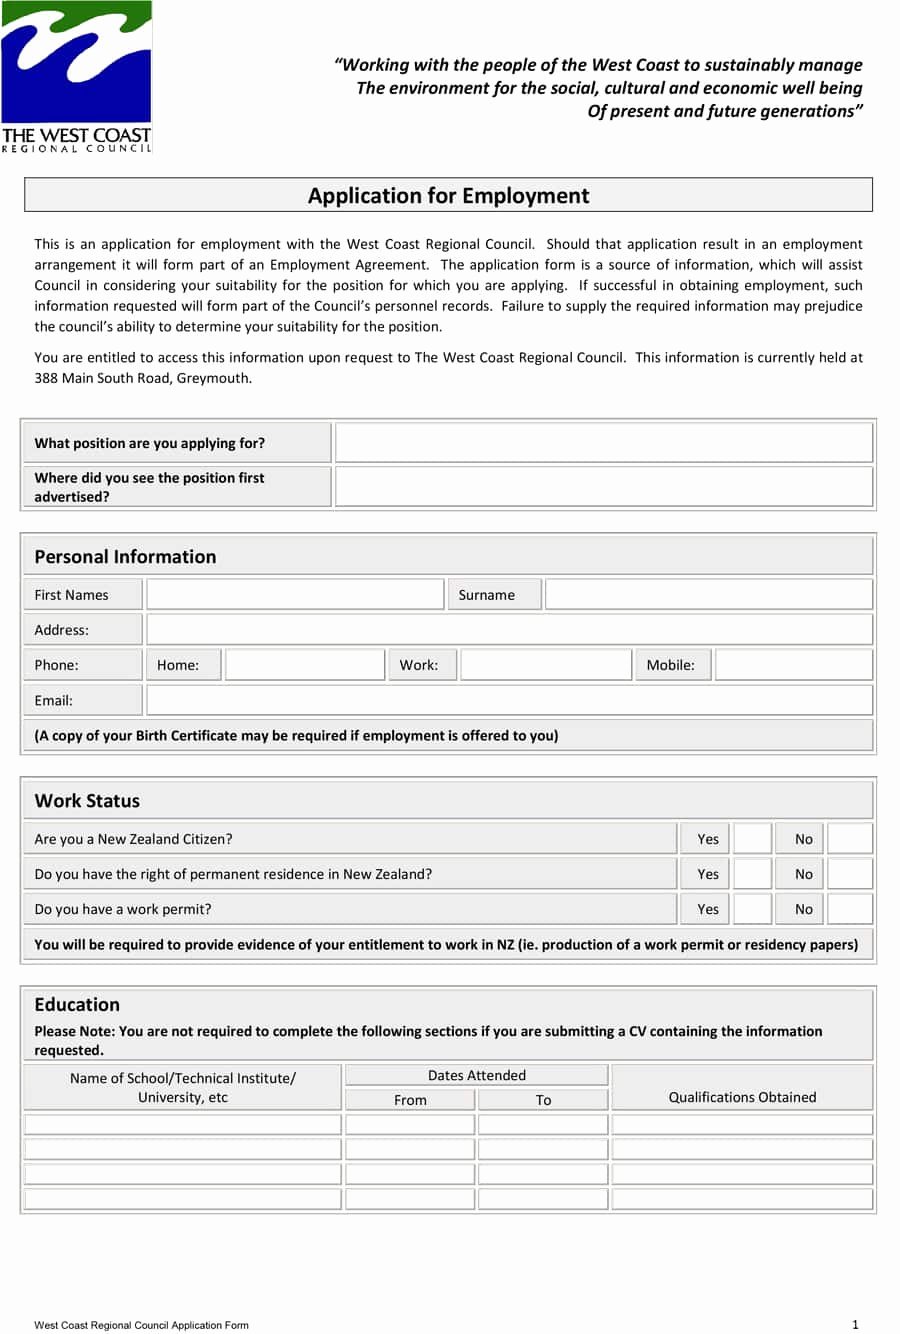 Application for Employment Free Template Inspirational 50 Free Employment Job Application form Templates